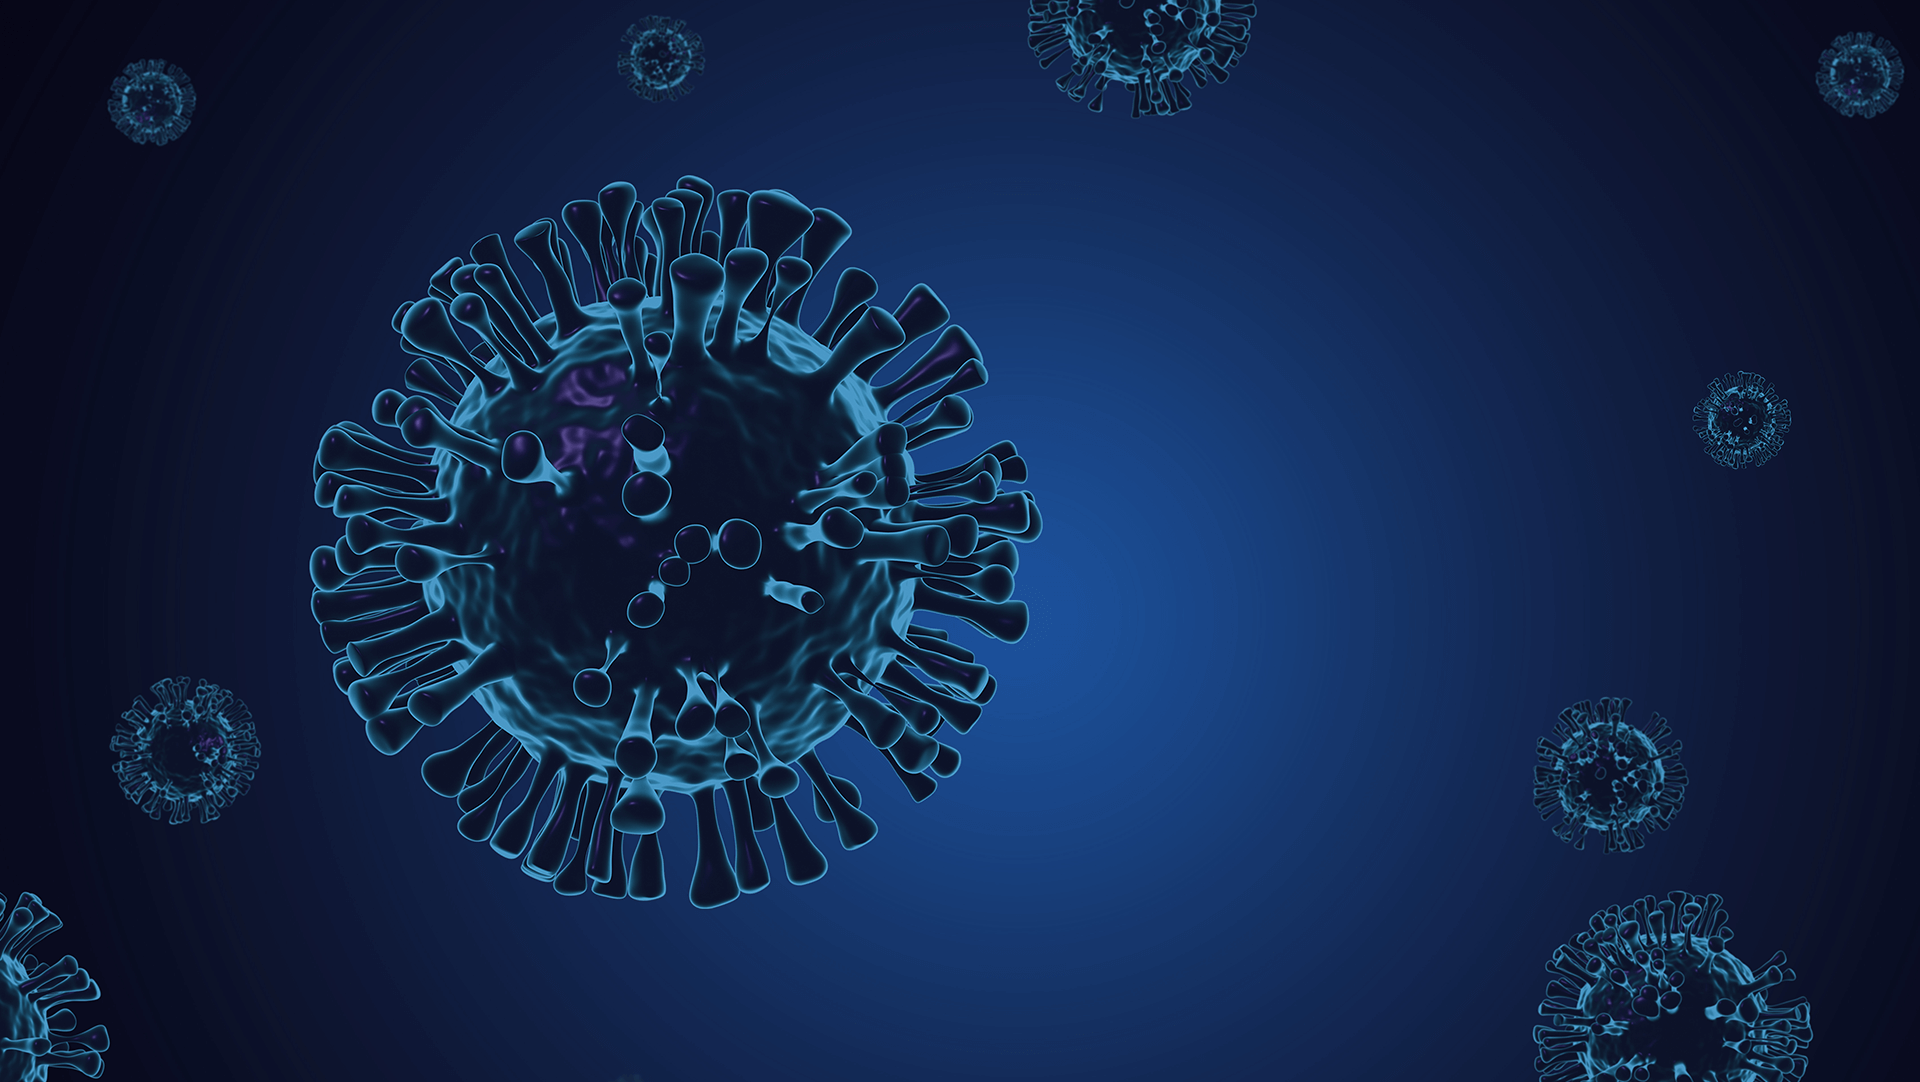 Digital representation of viruses in a dark microscopic view, highlighting the intricate structures of pathogens in a blue tone.